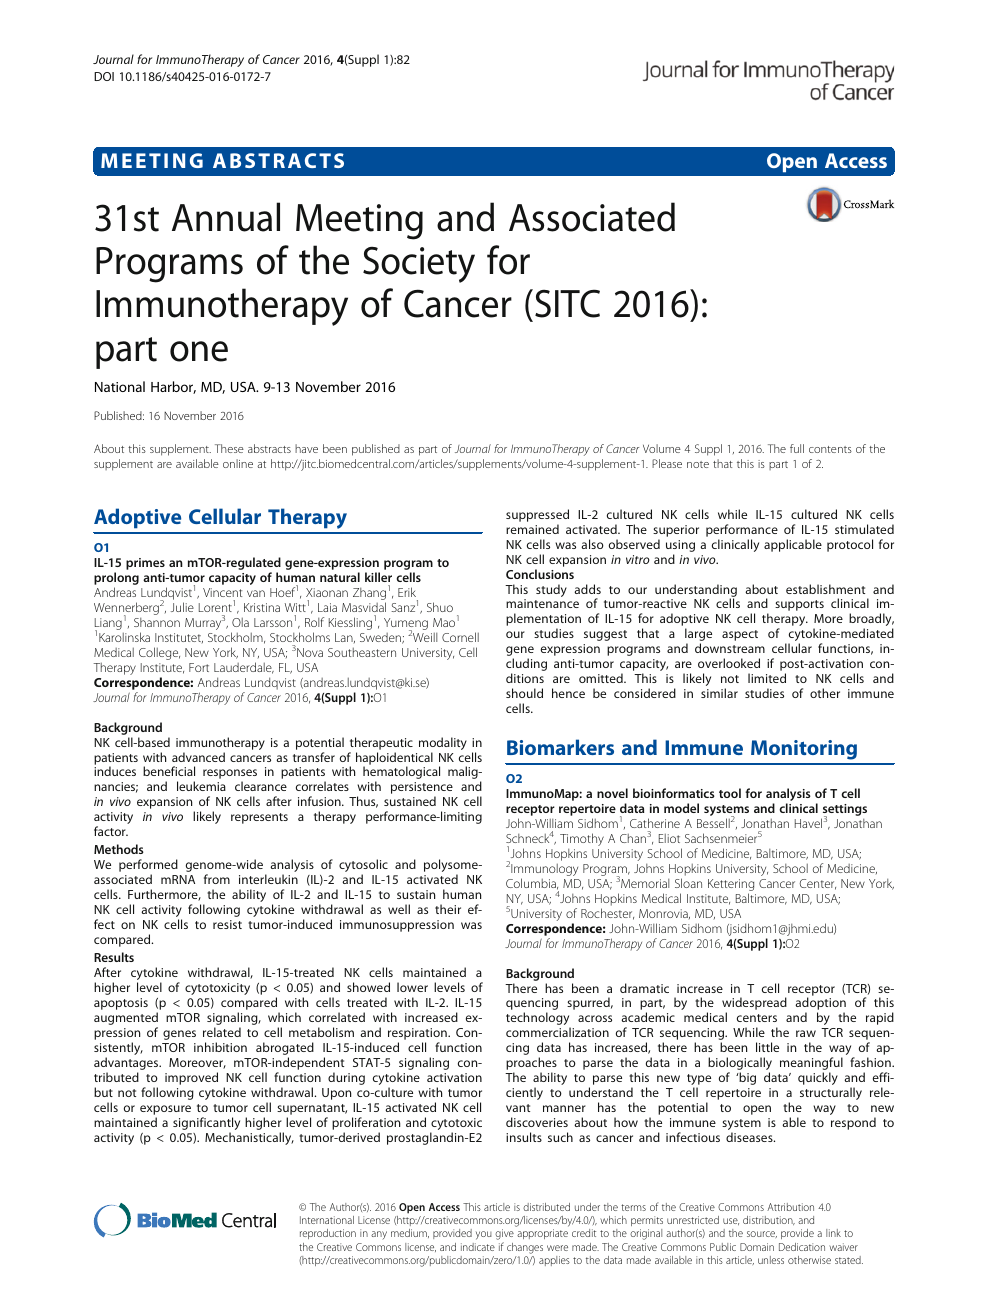 31st Annual Meeting And Associated Programs Of The Society For Immunotherapy Of Cancer Sitc 16 Part One Topic Of Research Paper In Clinical Medicine Download Scholarly Article Pdf And Read For